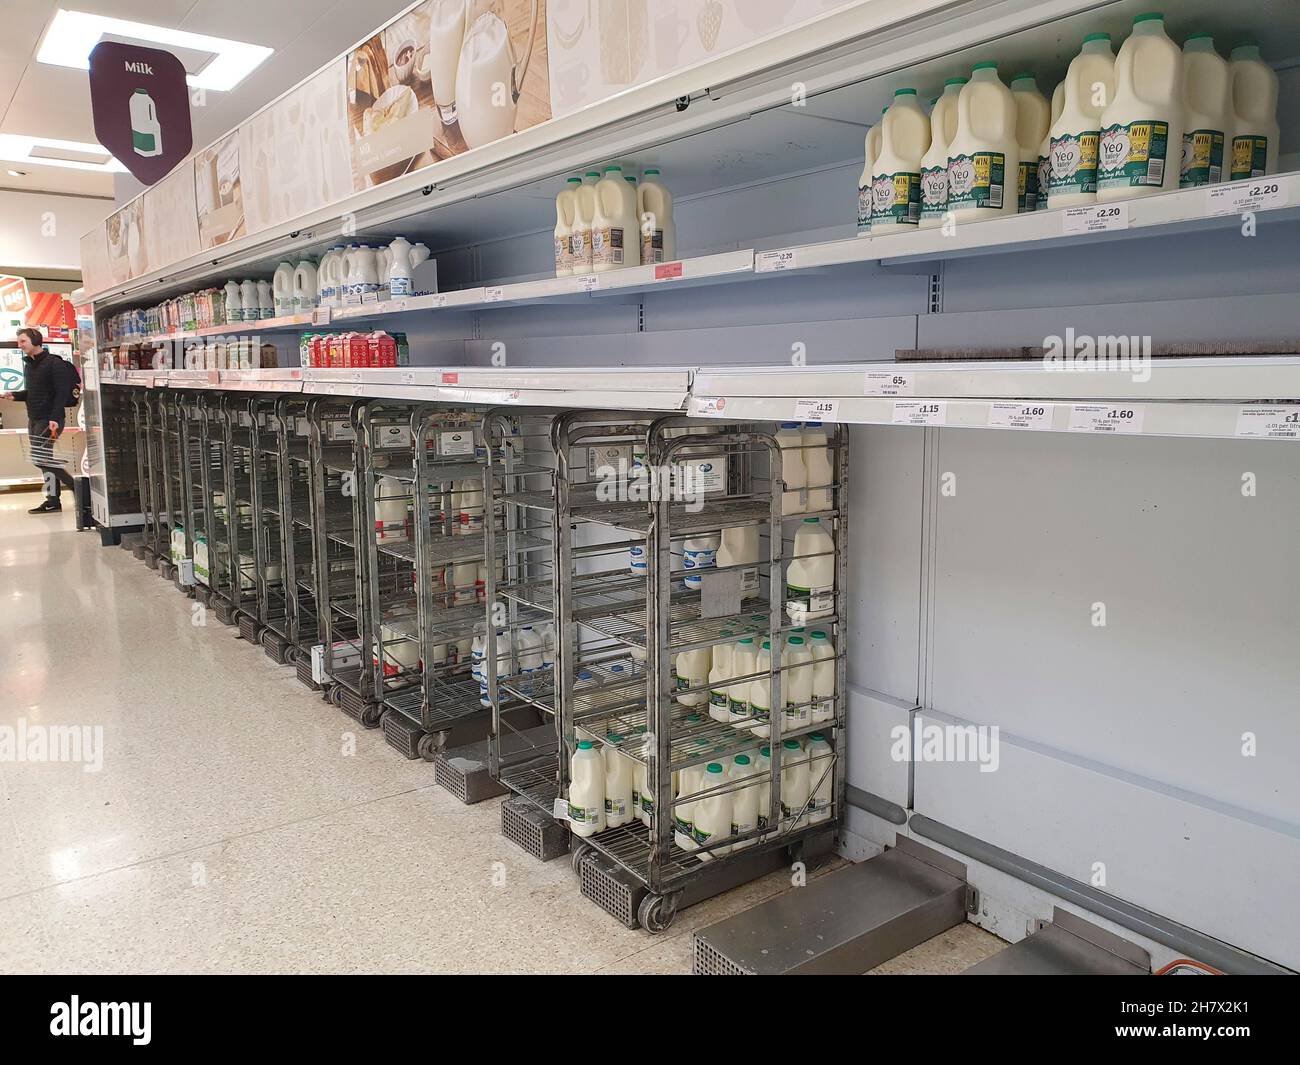 London, UK, 25 November 2021: at the Clapham High street branch of Sainsbury's supermarket empty racks show the ongoing problems in supply chain distribution and deliveries. Anna Watson/Alamy Live News Stock Photo